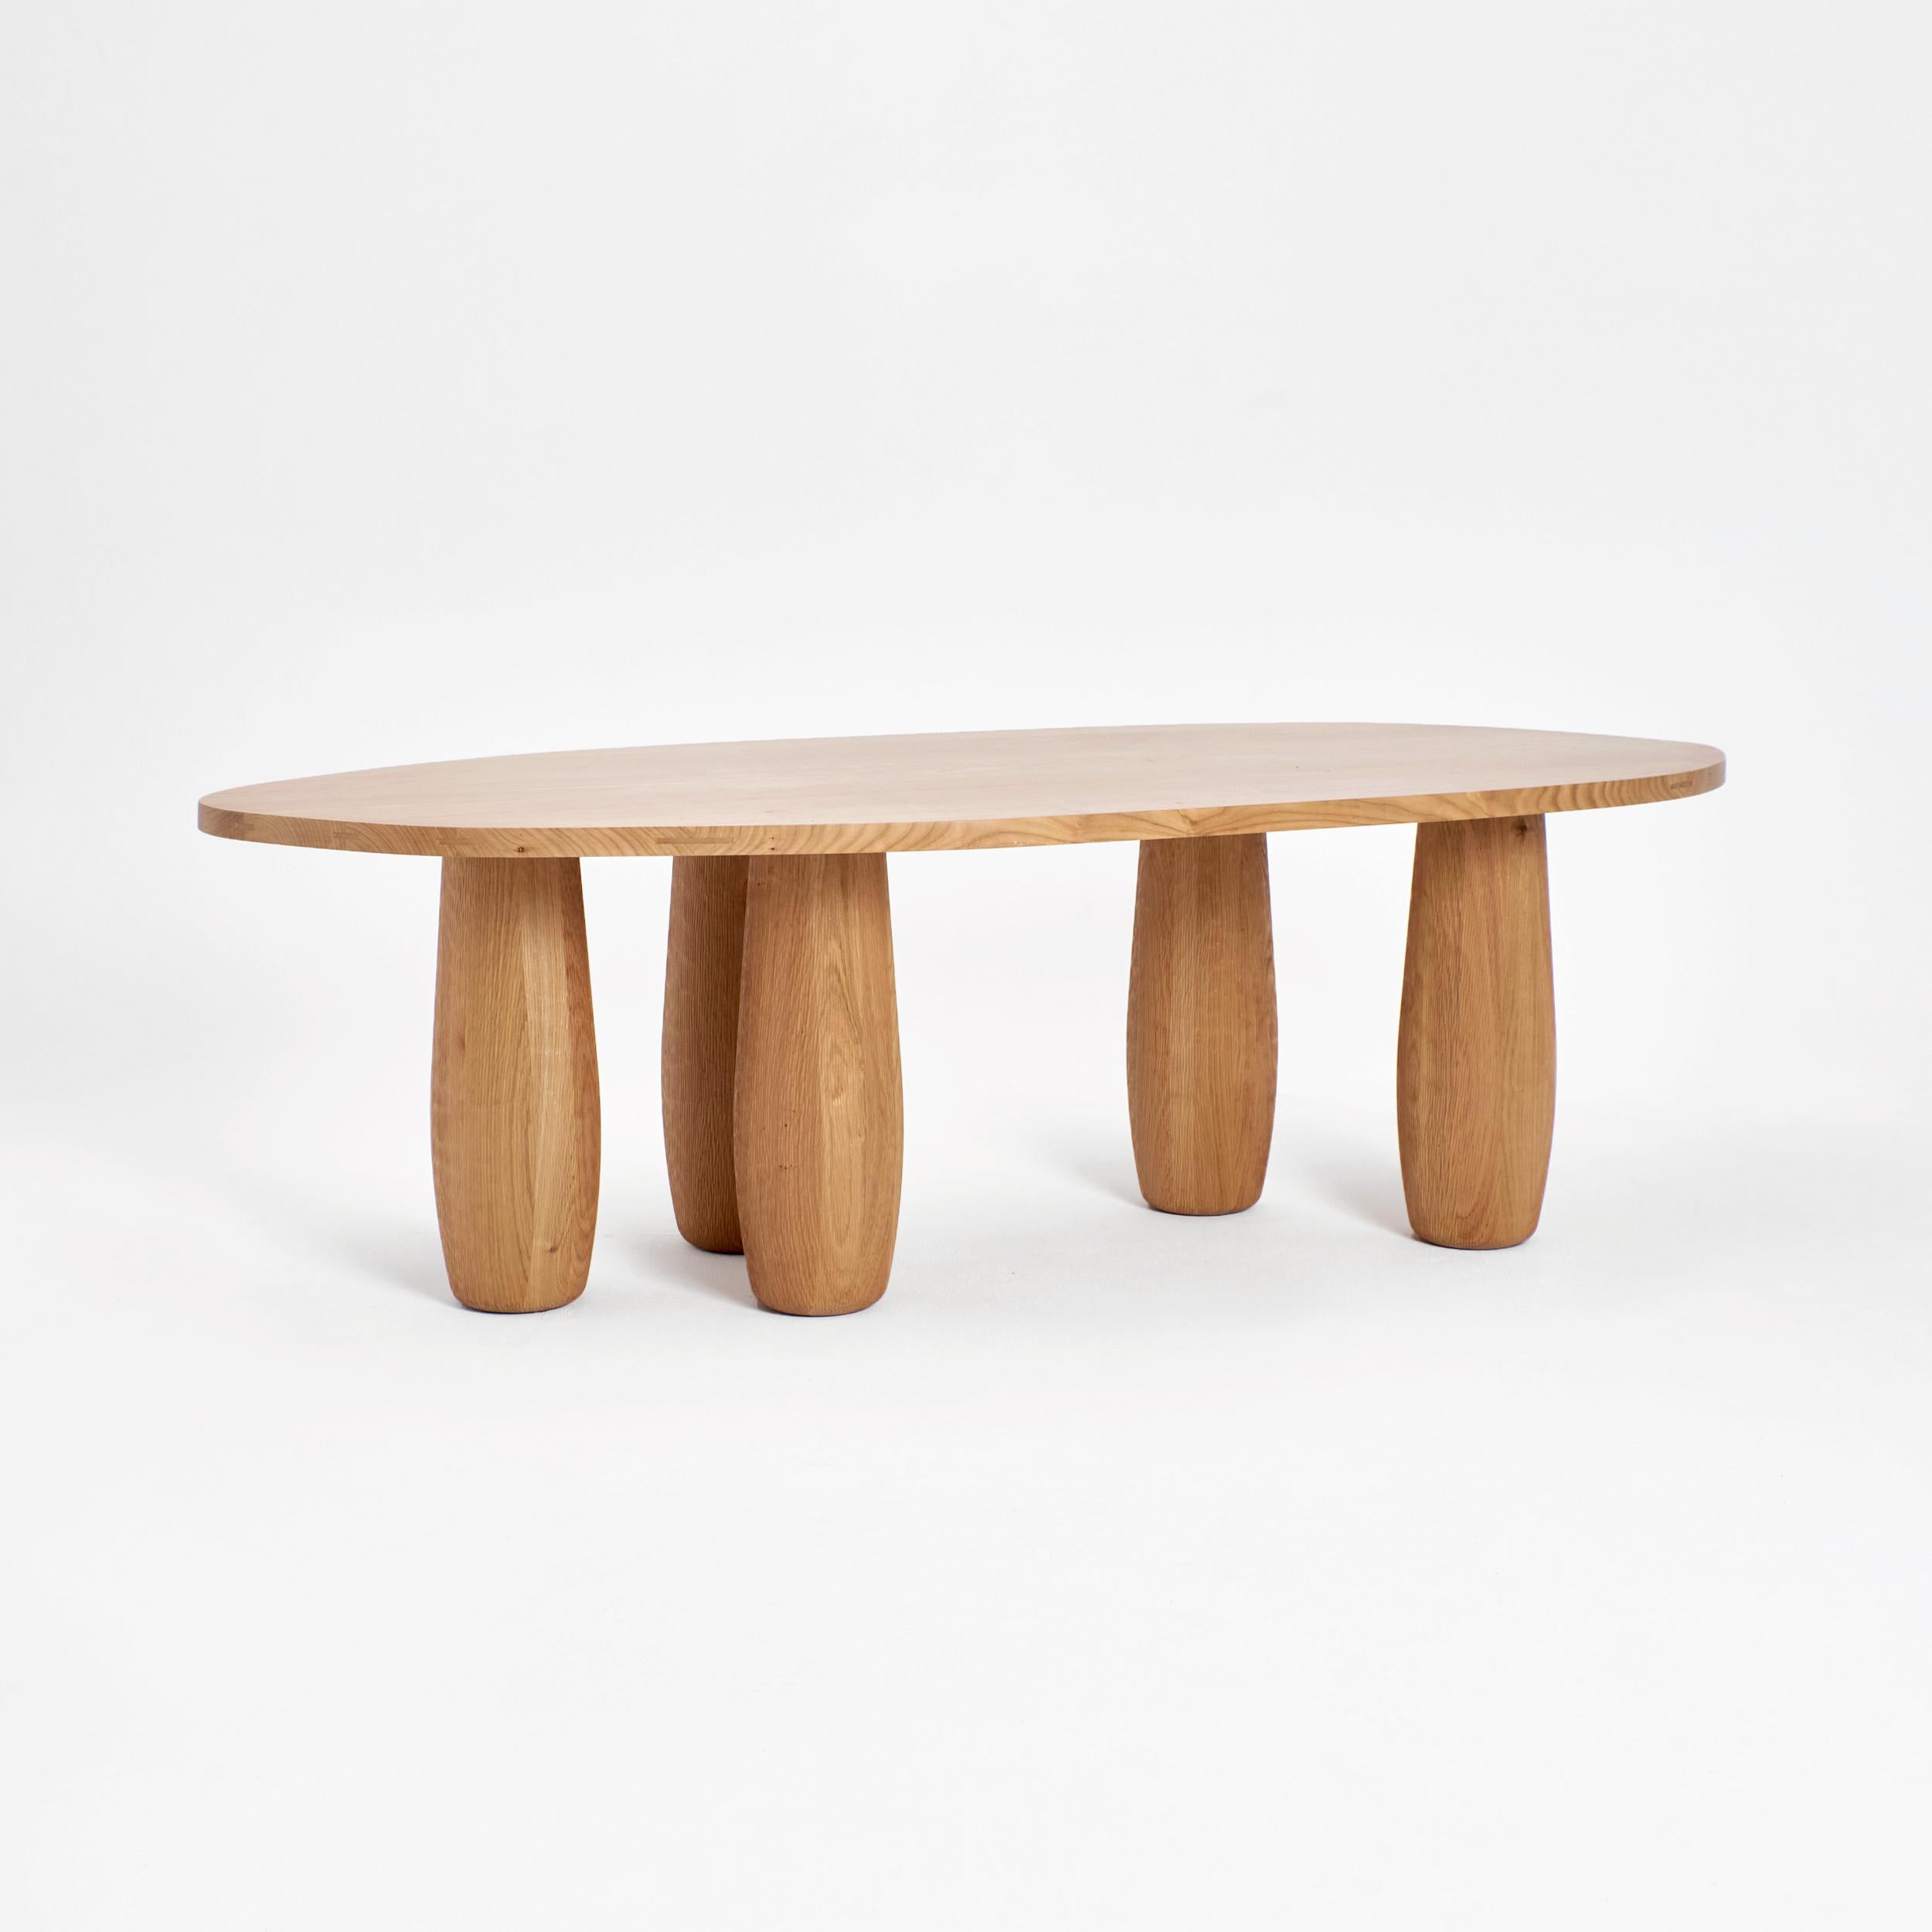 A table dining table by Project 213A
Dimensions: D 117 x W 214.5 x H 76.5 cm
Materials: Cherry wood. 

An asymmetric table top standing on five oval legs. Each segment carved from an individual piece of cherry wood to showcase the natural flow